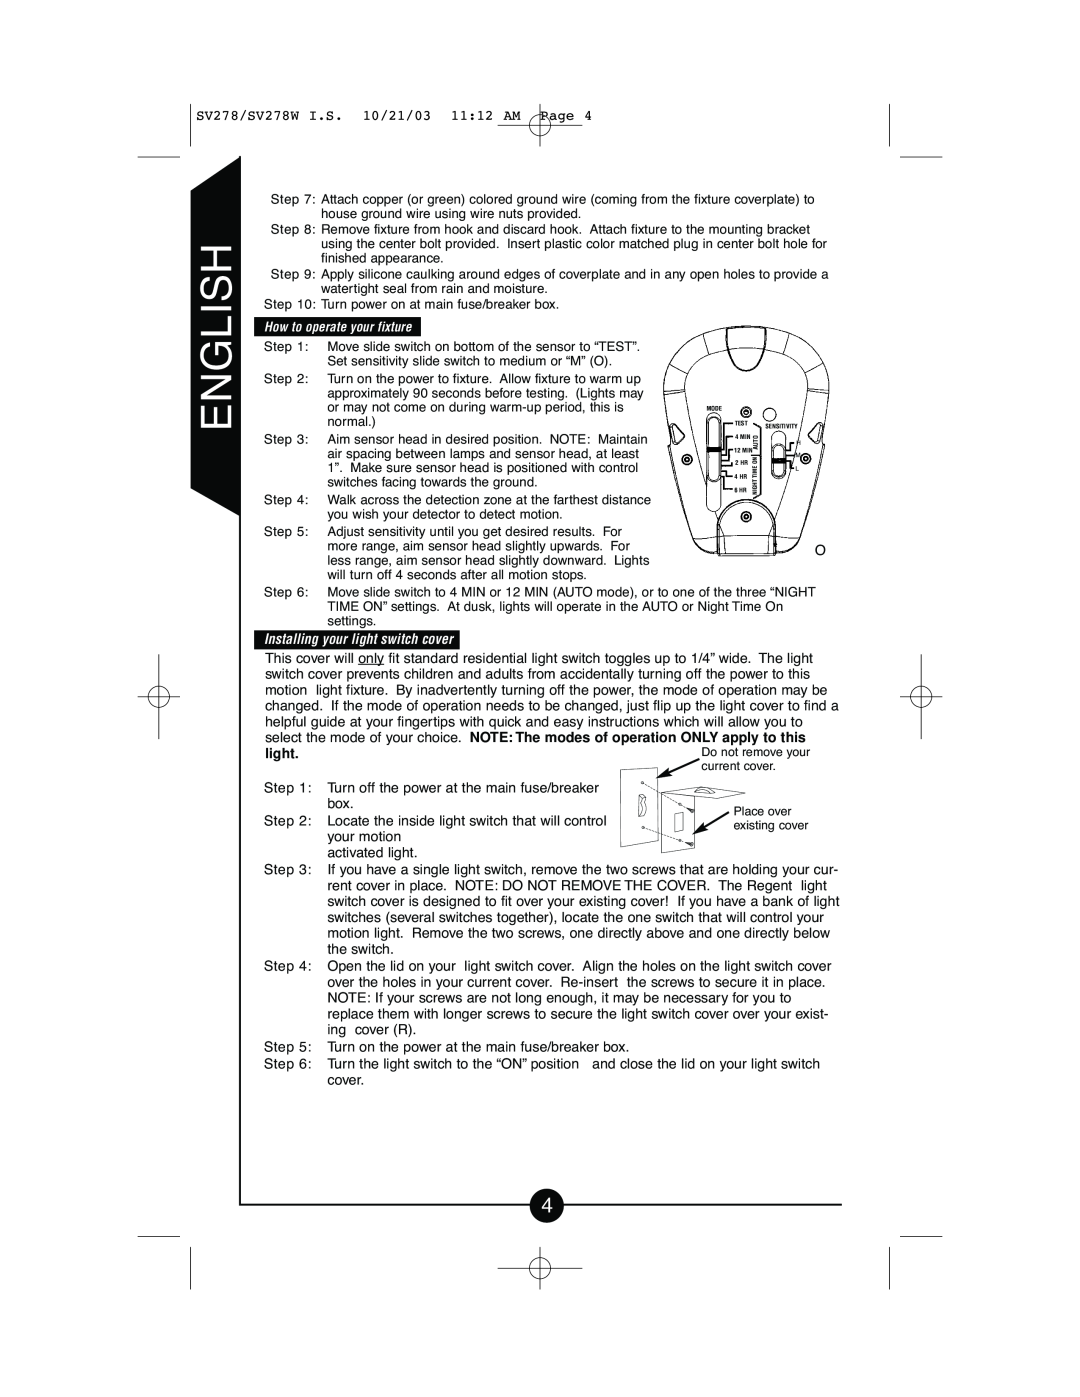 Cooper Lighting CSV278W instruction manual English, Installing your light switch cover 